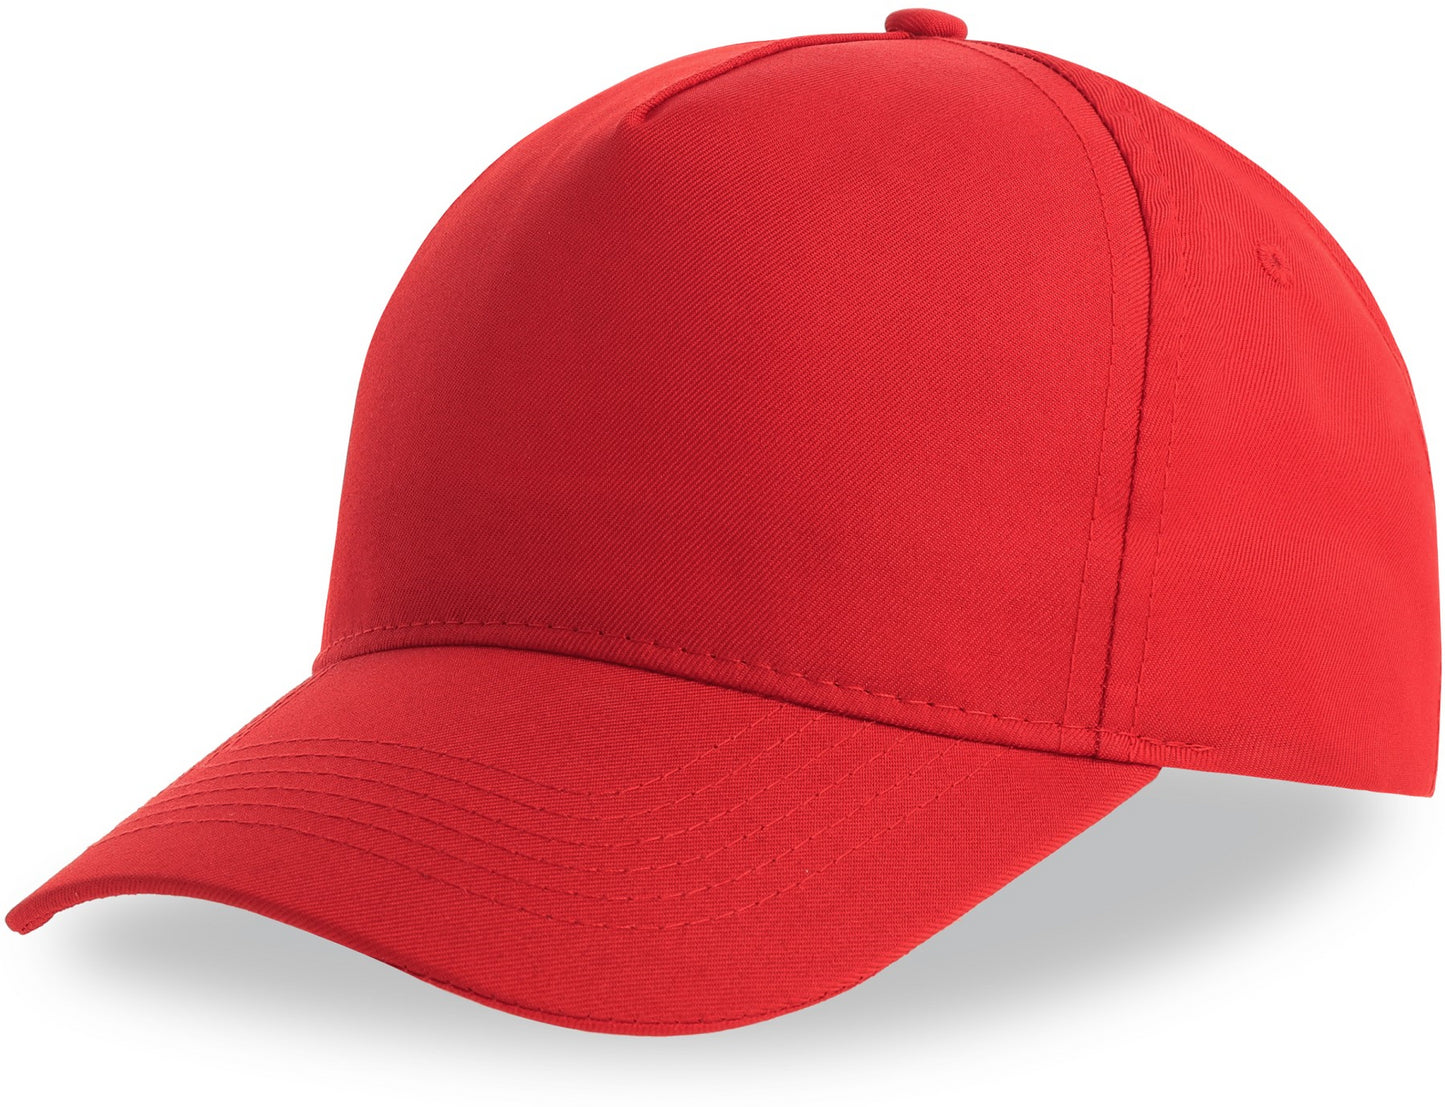 Atlantis Youths Recy 5 Recycled 5 Panel Cap - Red